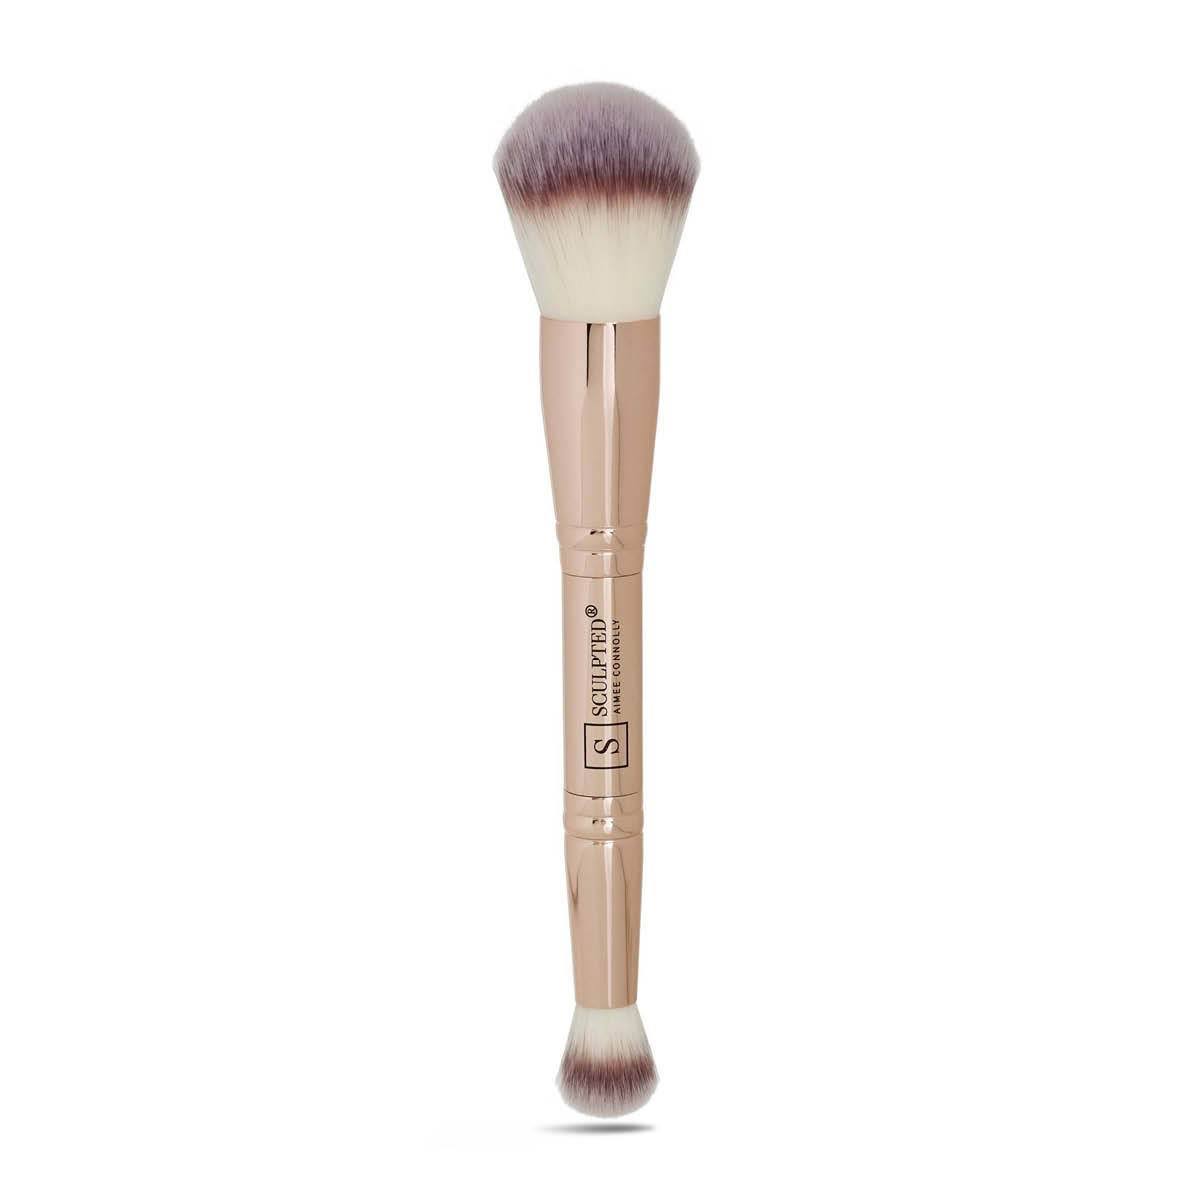 Sculpted By Aimee Beauty Buffer Complexion Brush Duo